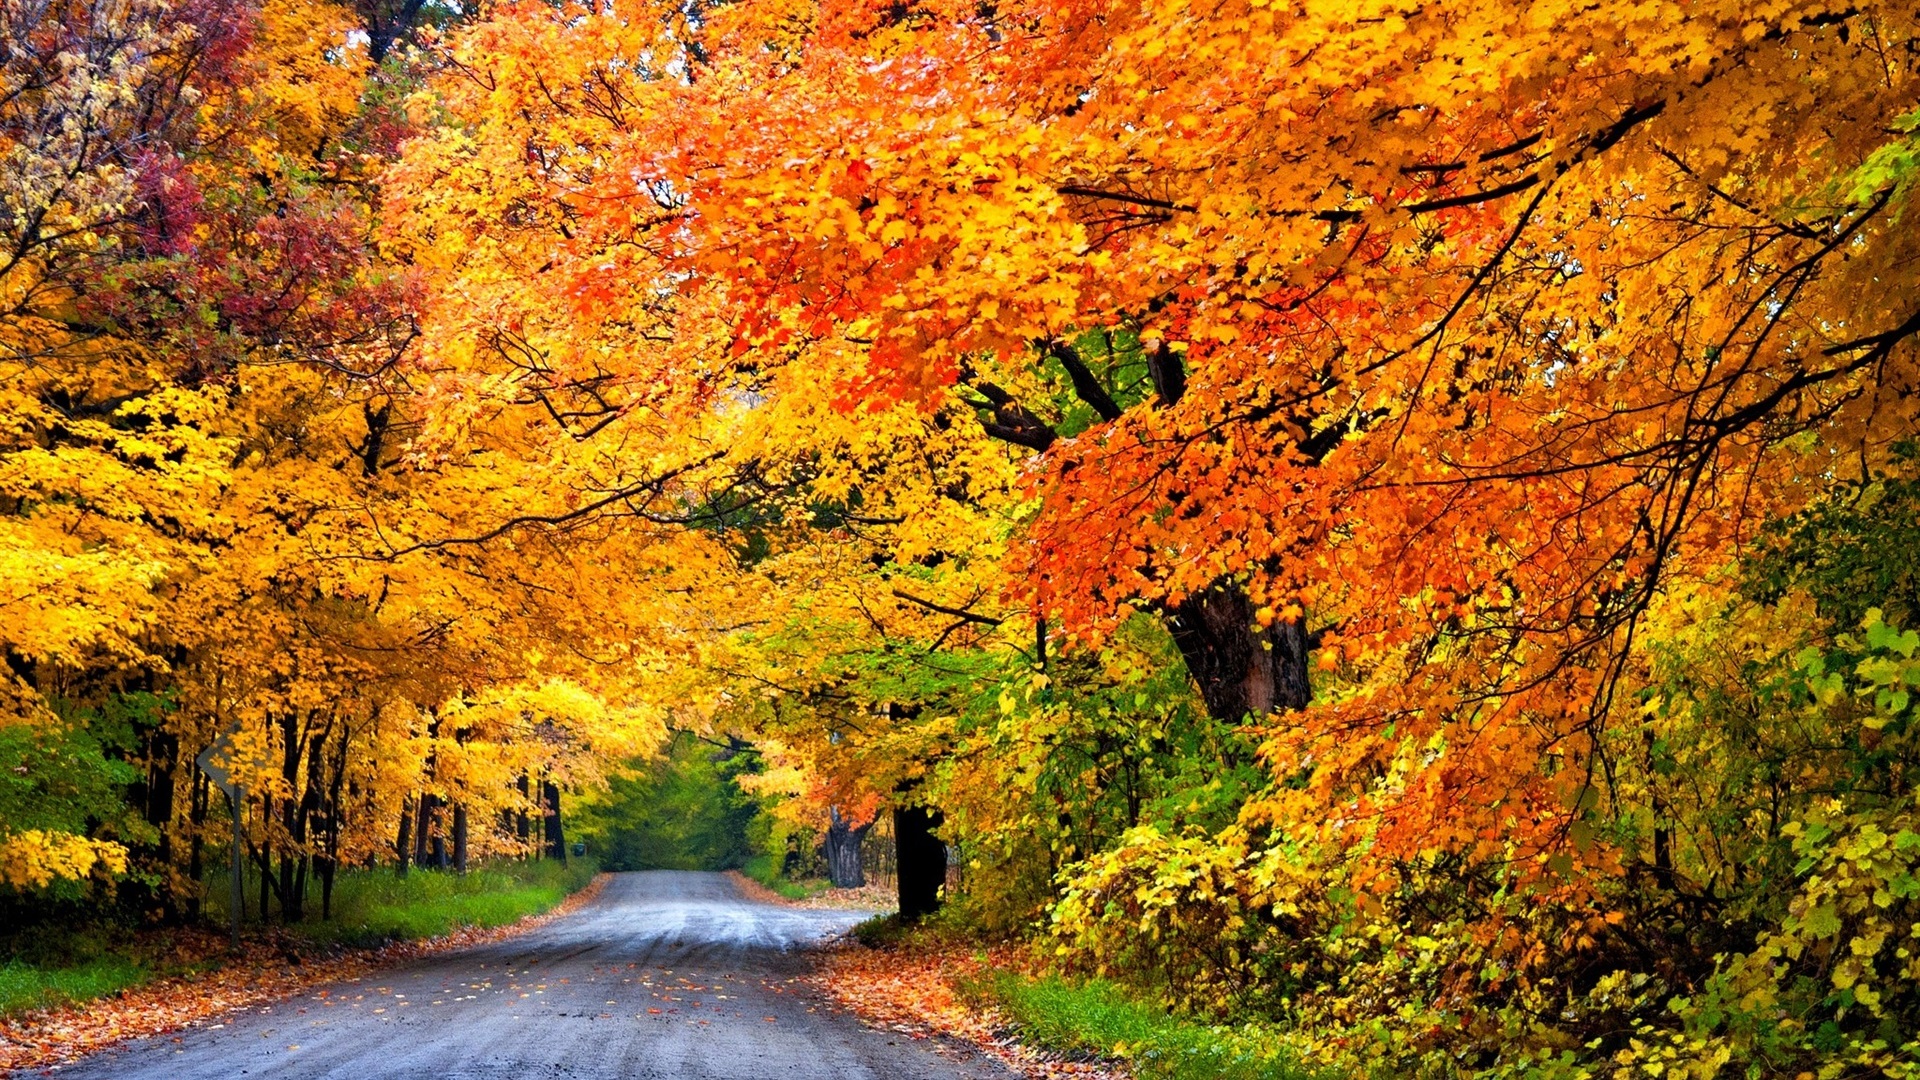 Colorful Autumn Road Trees Park X | Free Images at Clker.com - vector ...